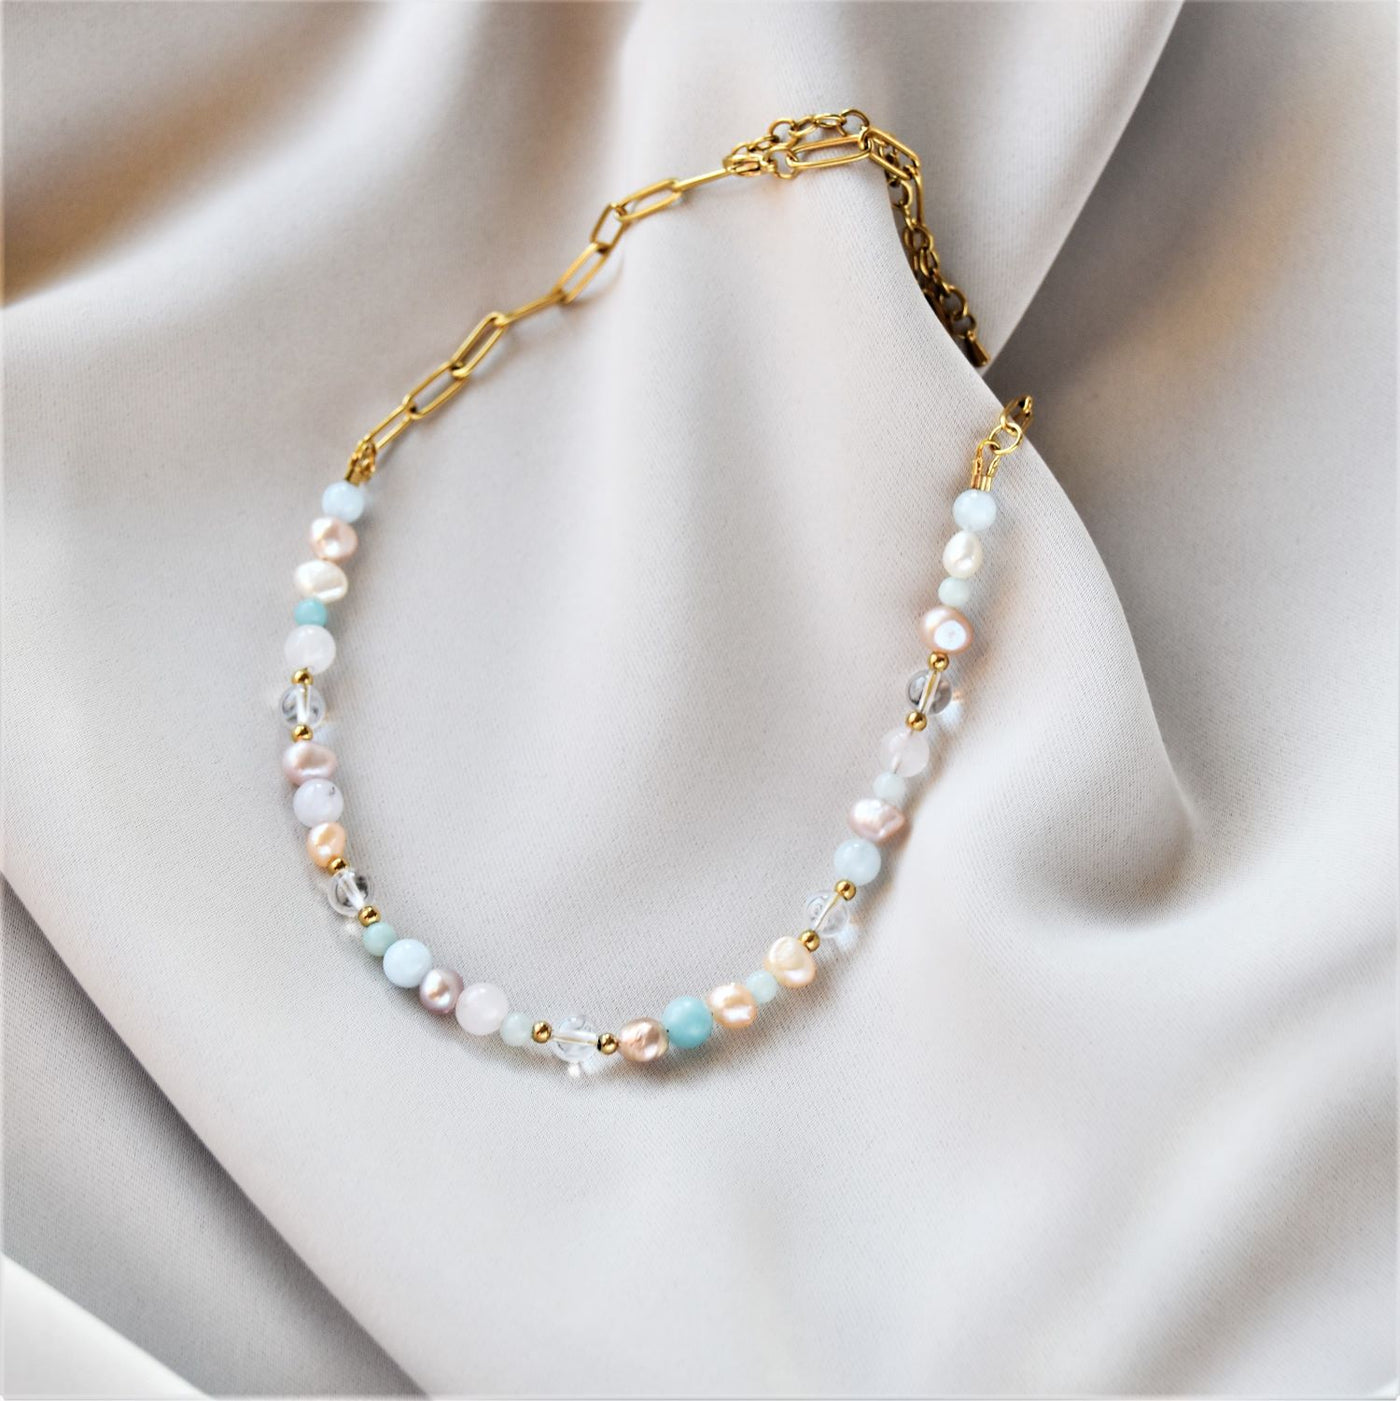 Pastel necklace with freshwater pearls and gemstones